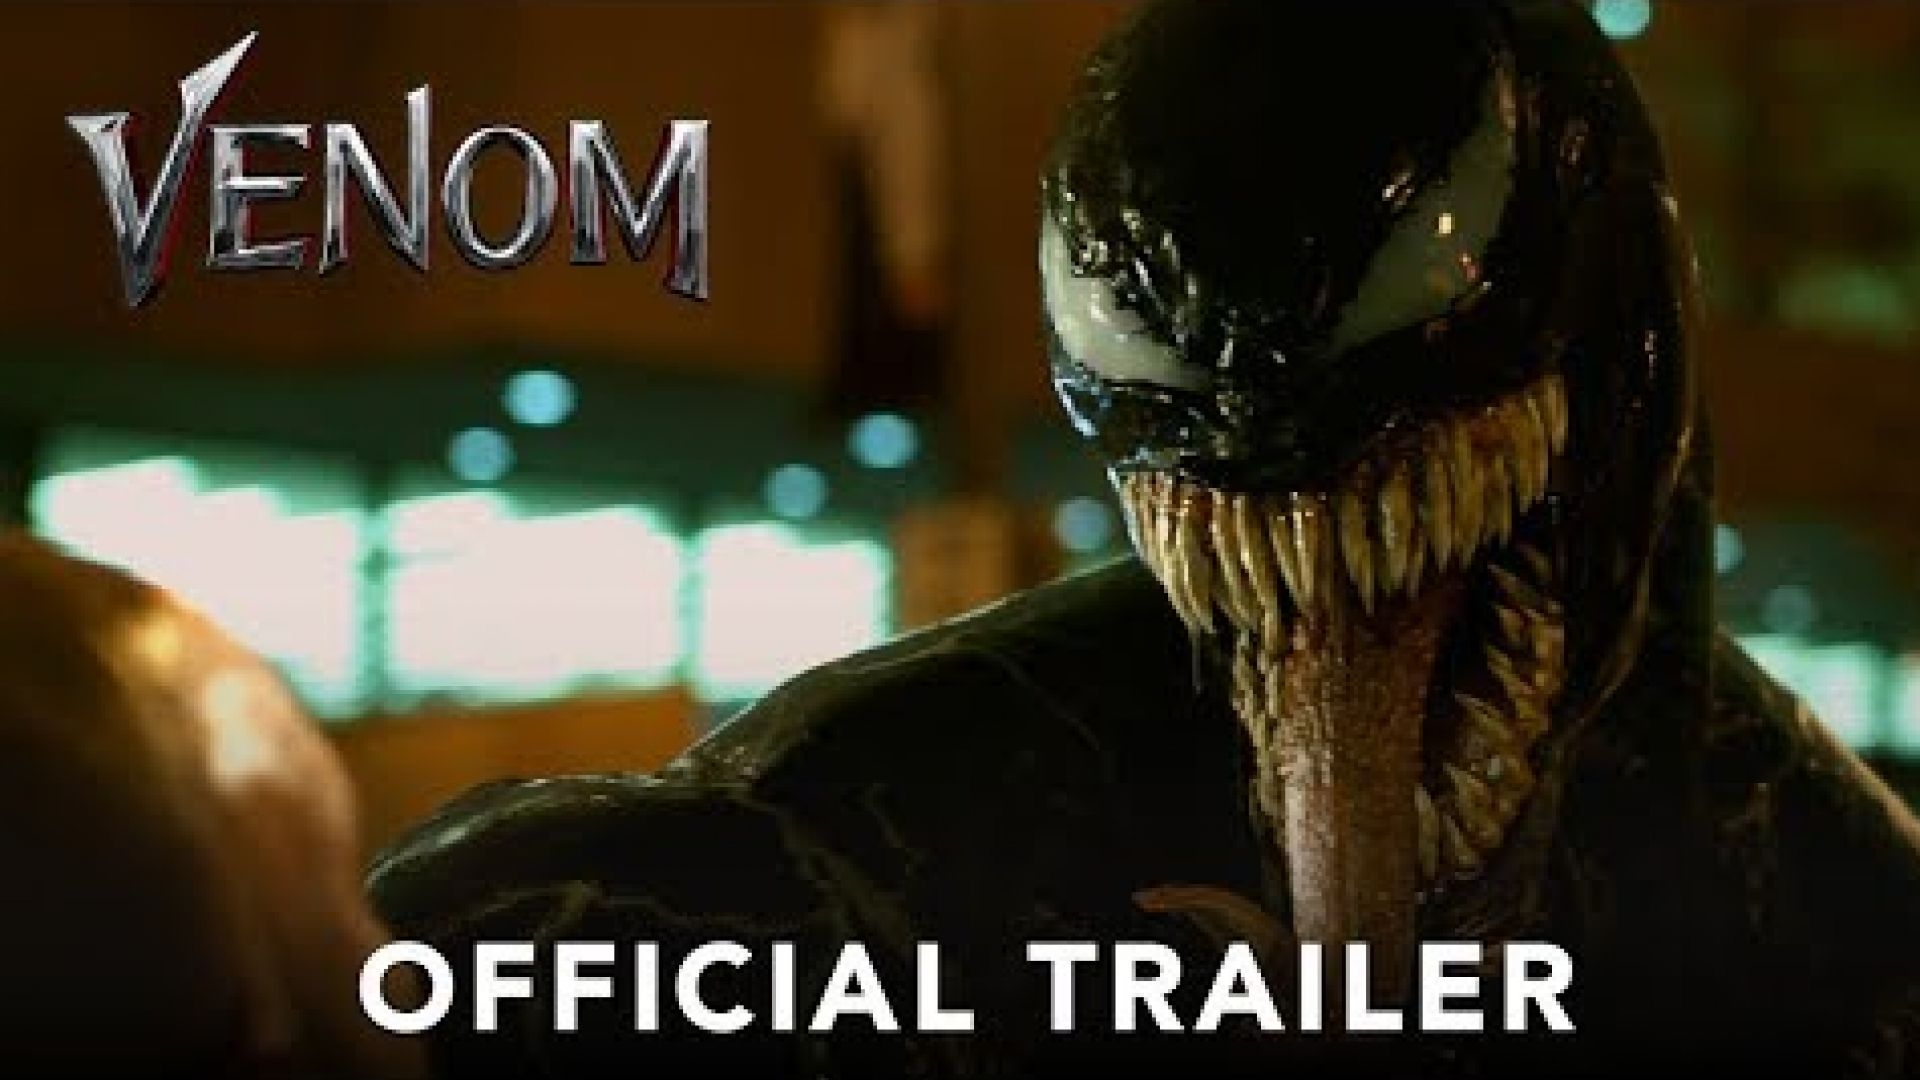 &#039;Venom&#039; Official Trailer - Sony Pictures